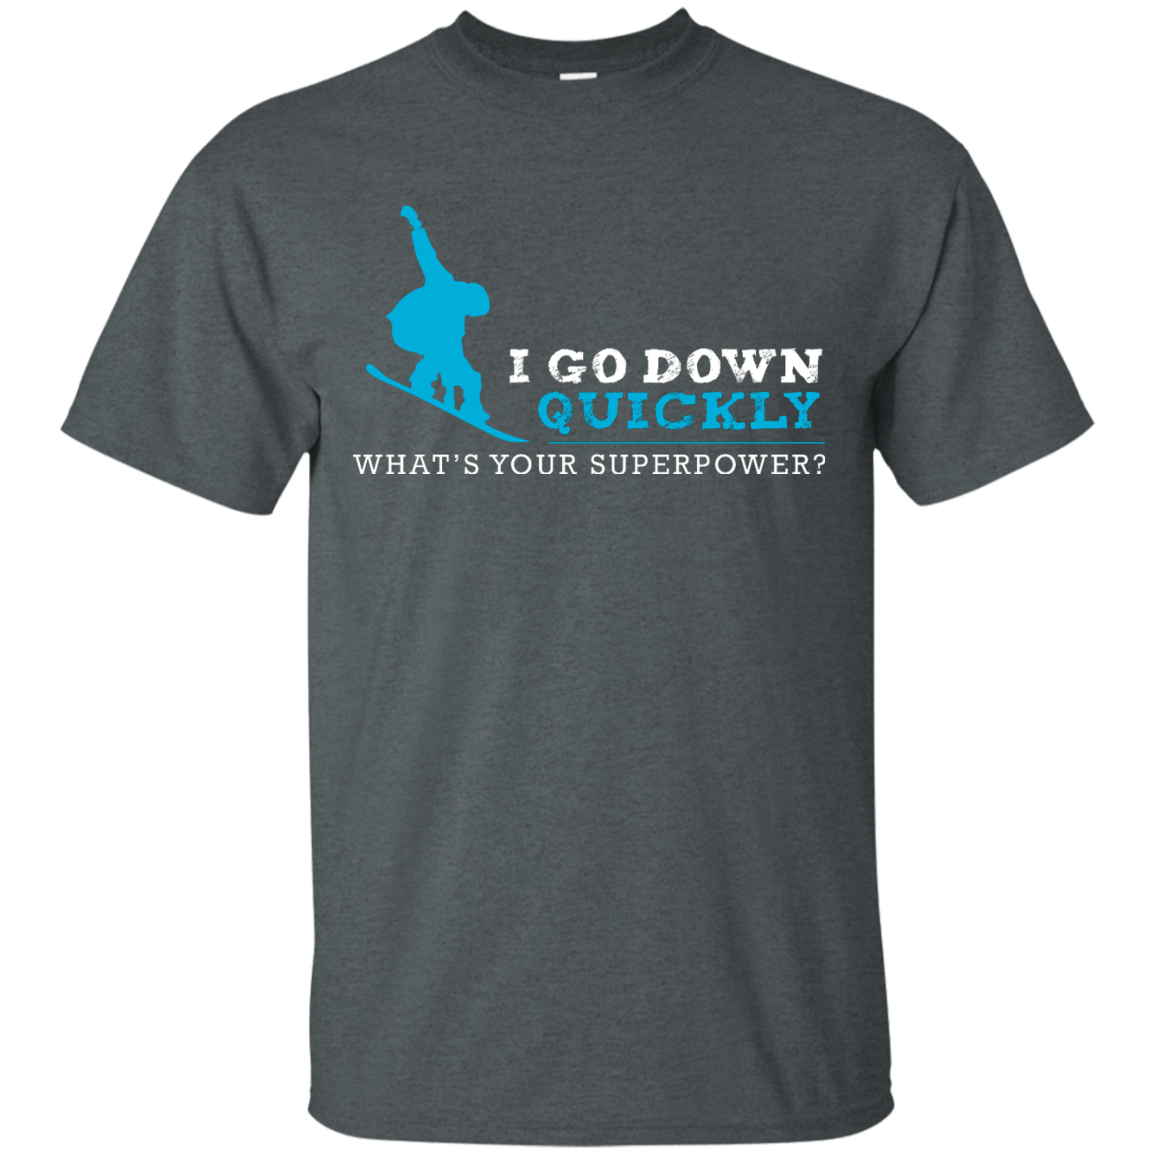 I Go Down Quickly What's Your Superpower - Snowboard Tees and V-neck - Powderaddicts